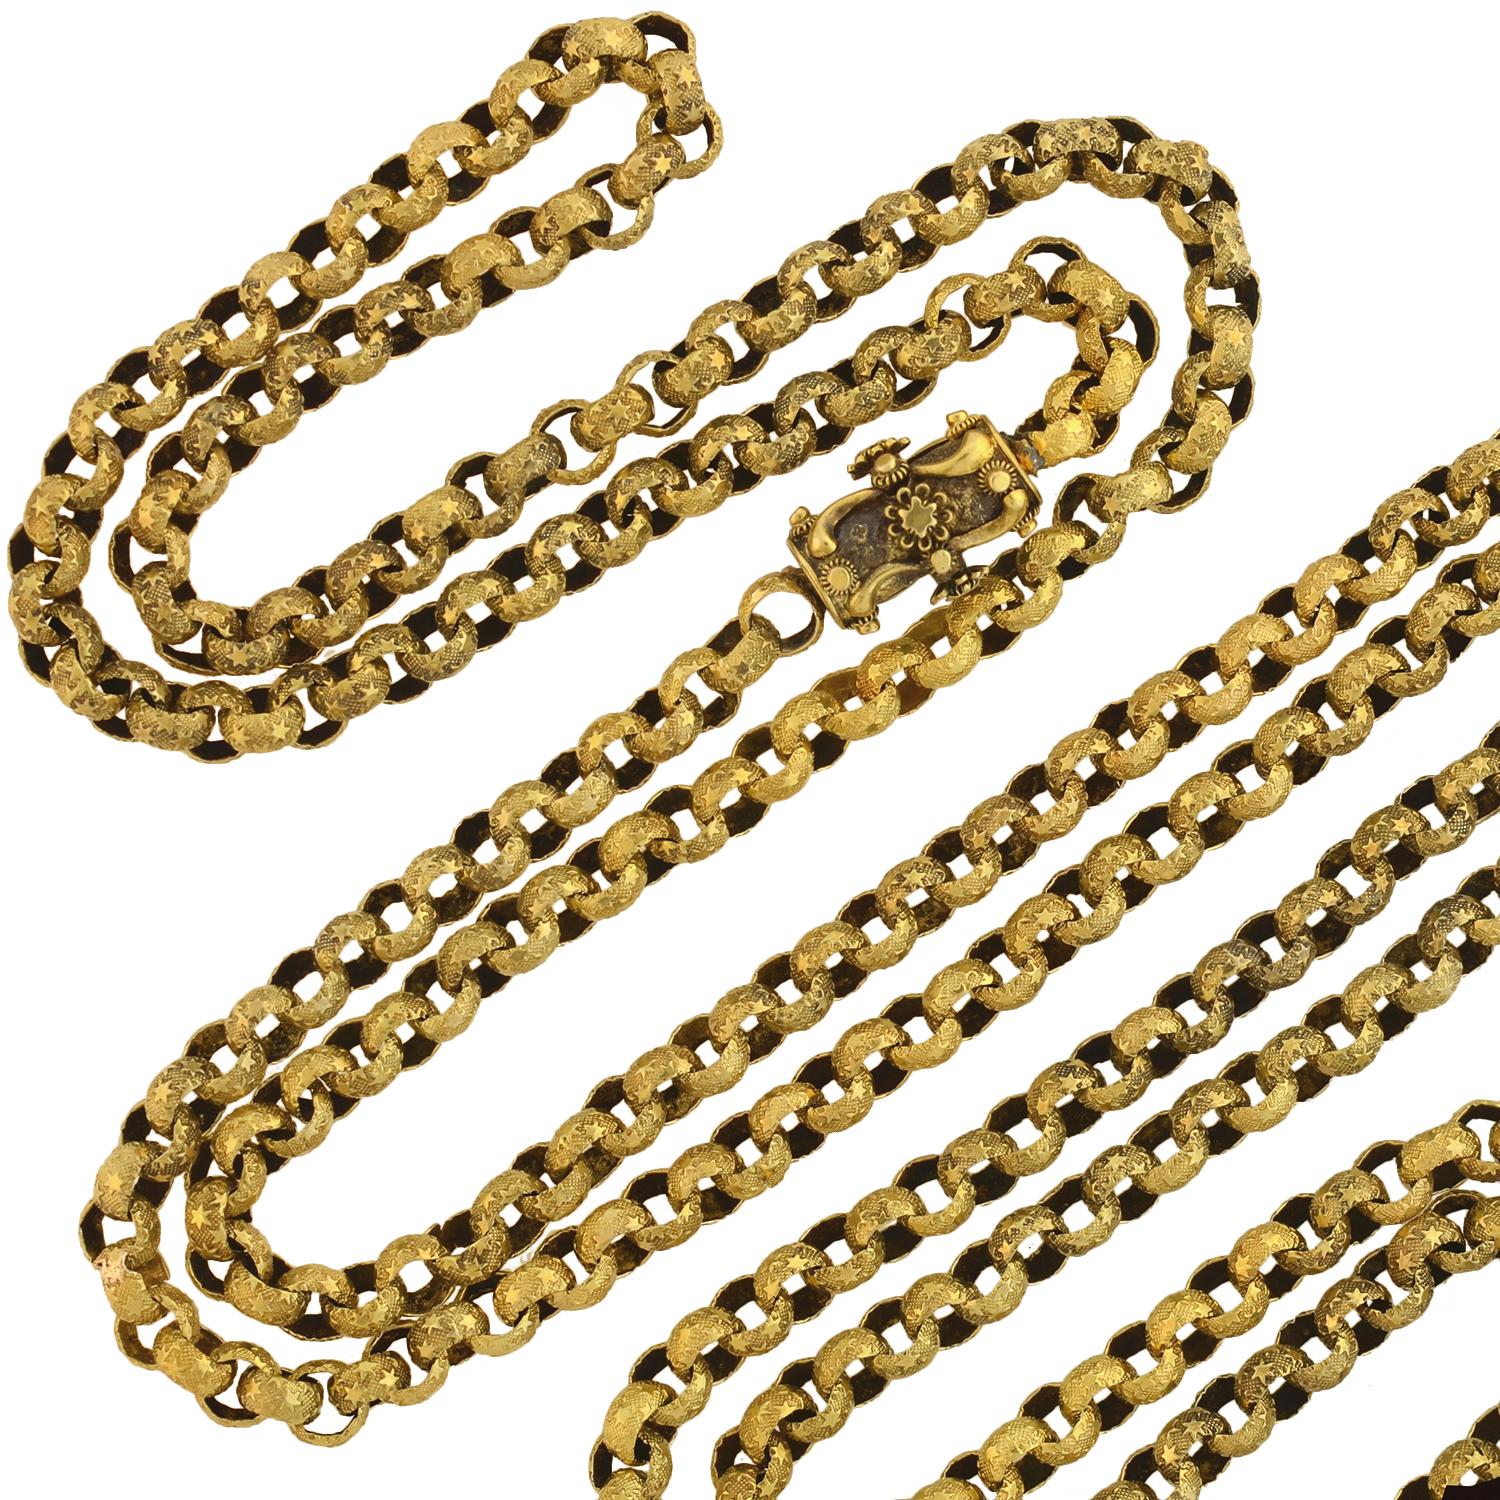 A fabulous link chain from the Victorian (ca1880) era! This beautiful handmade piece is comprised of interlocking 15kt gold links, forming a simple, yet stylish necklace. Each slightly concave link features a textured surface, with two rows of tiny